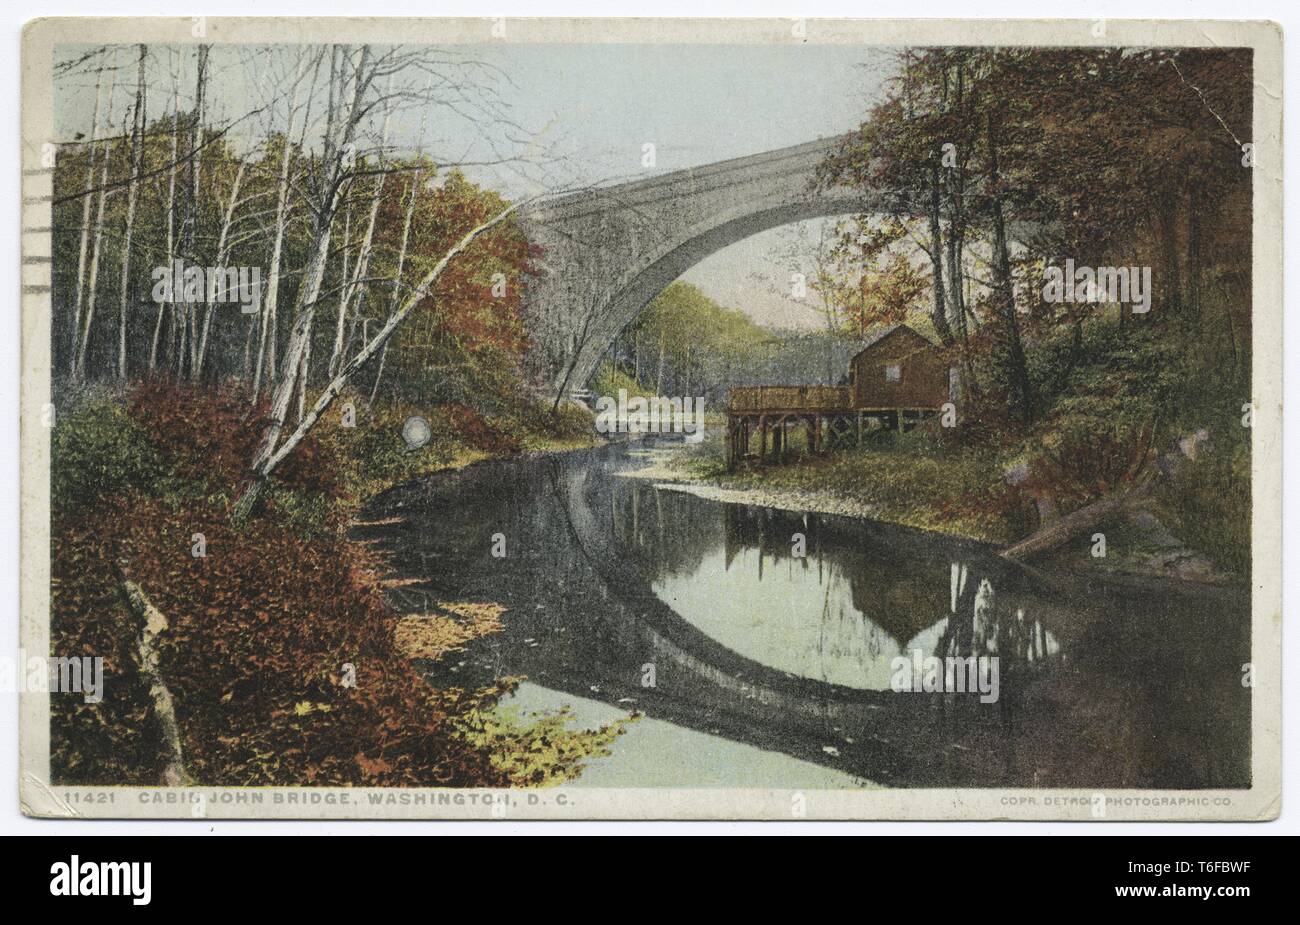 Detroit Publishing Company vintage postcard reproduction of the Cabin Johns Bridge over the Potomac River, Washington, District of Columbia, Washington, DC, 1914. From the New York Public Library. () Stock Photo